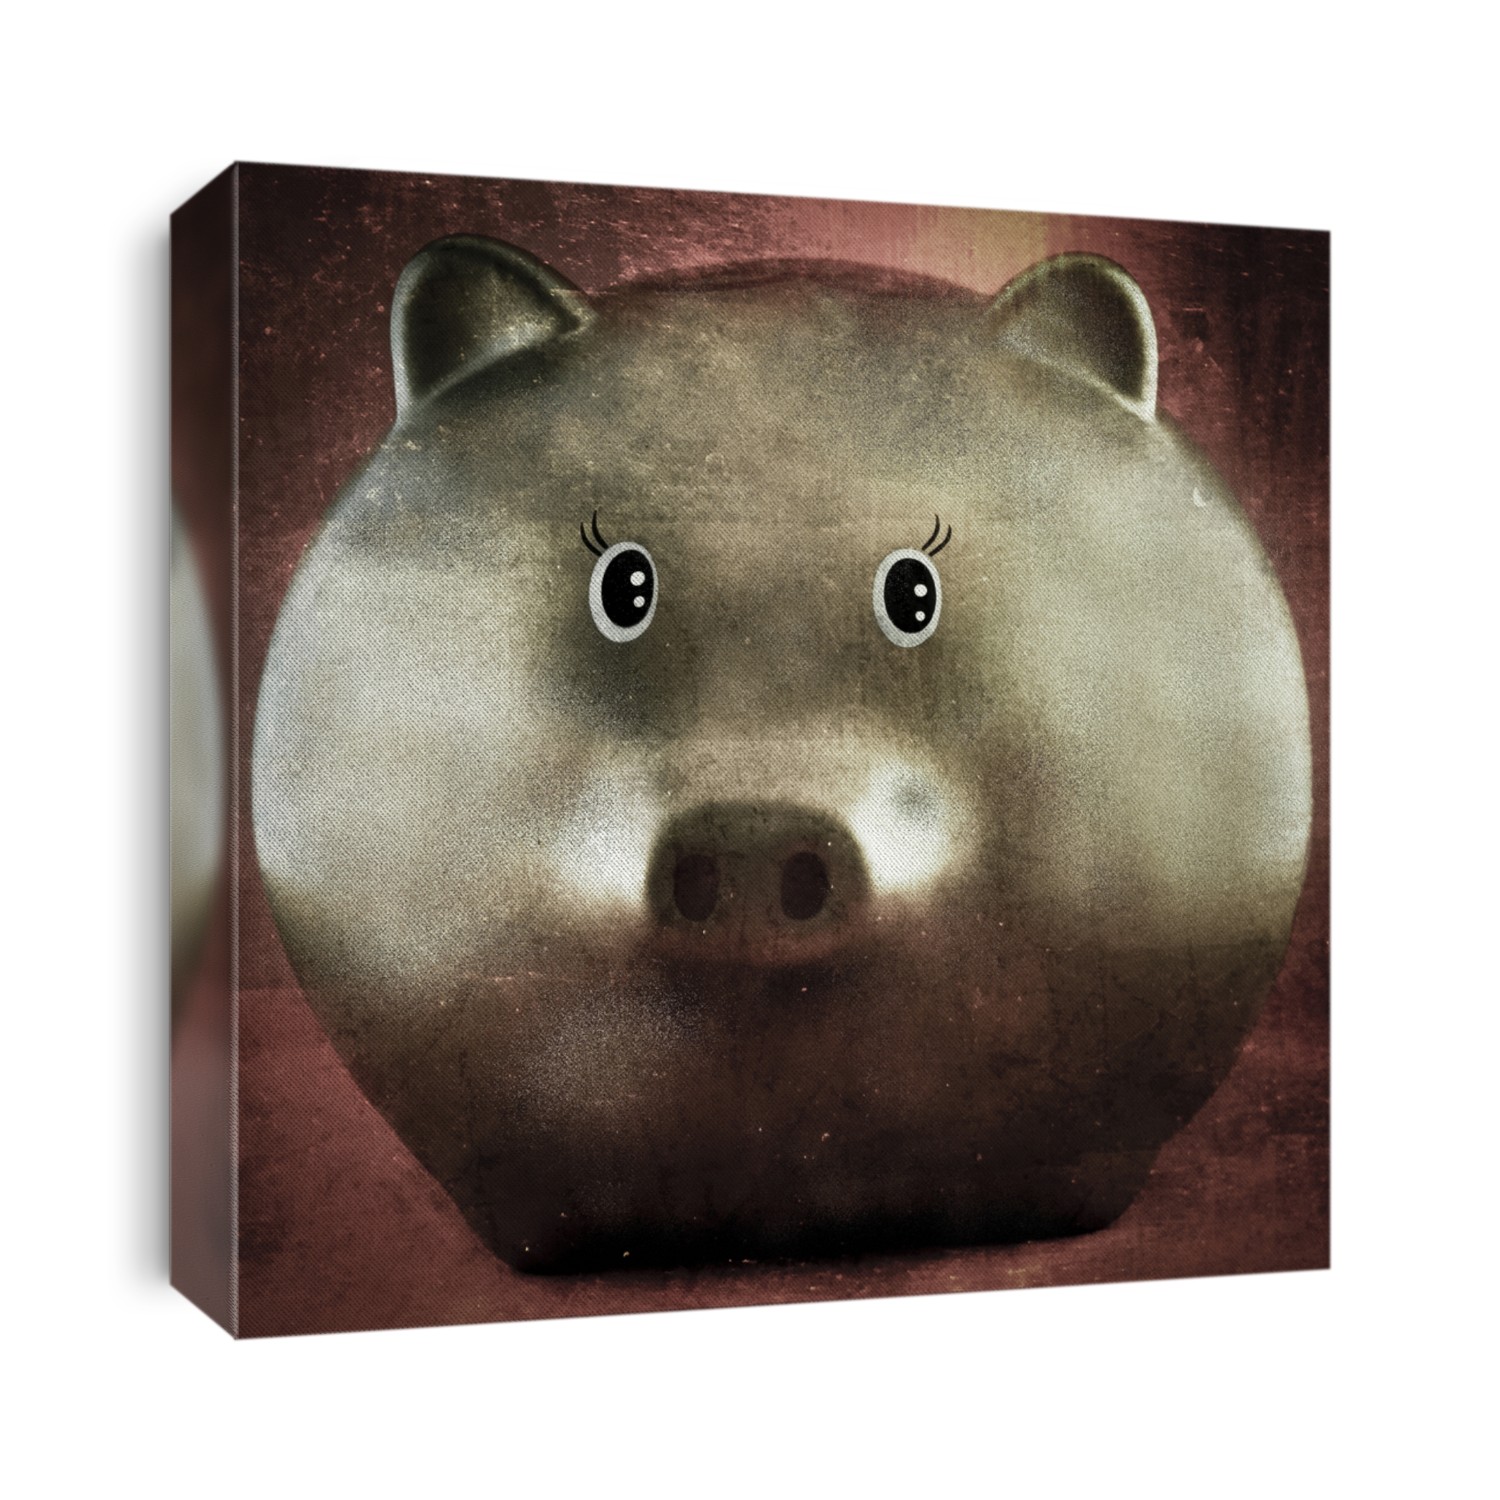 golden pig with red background